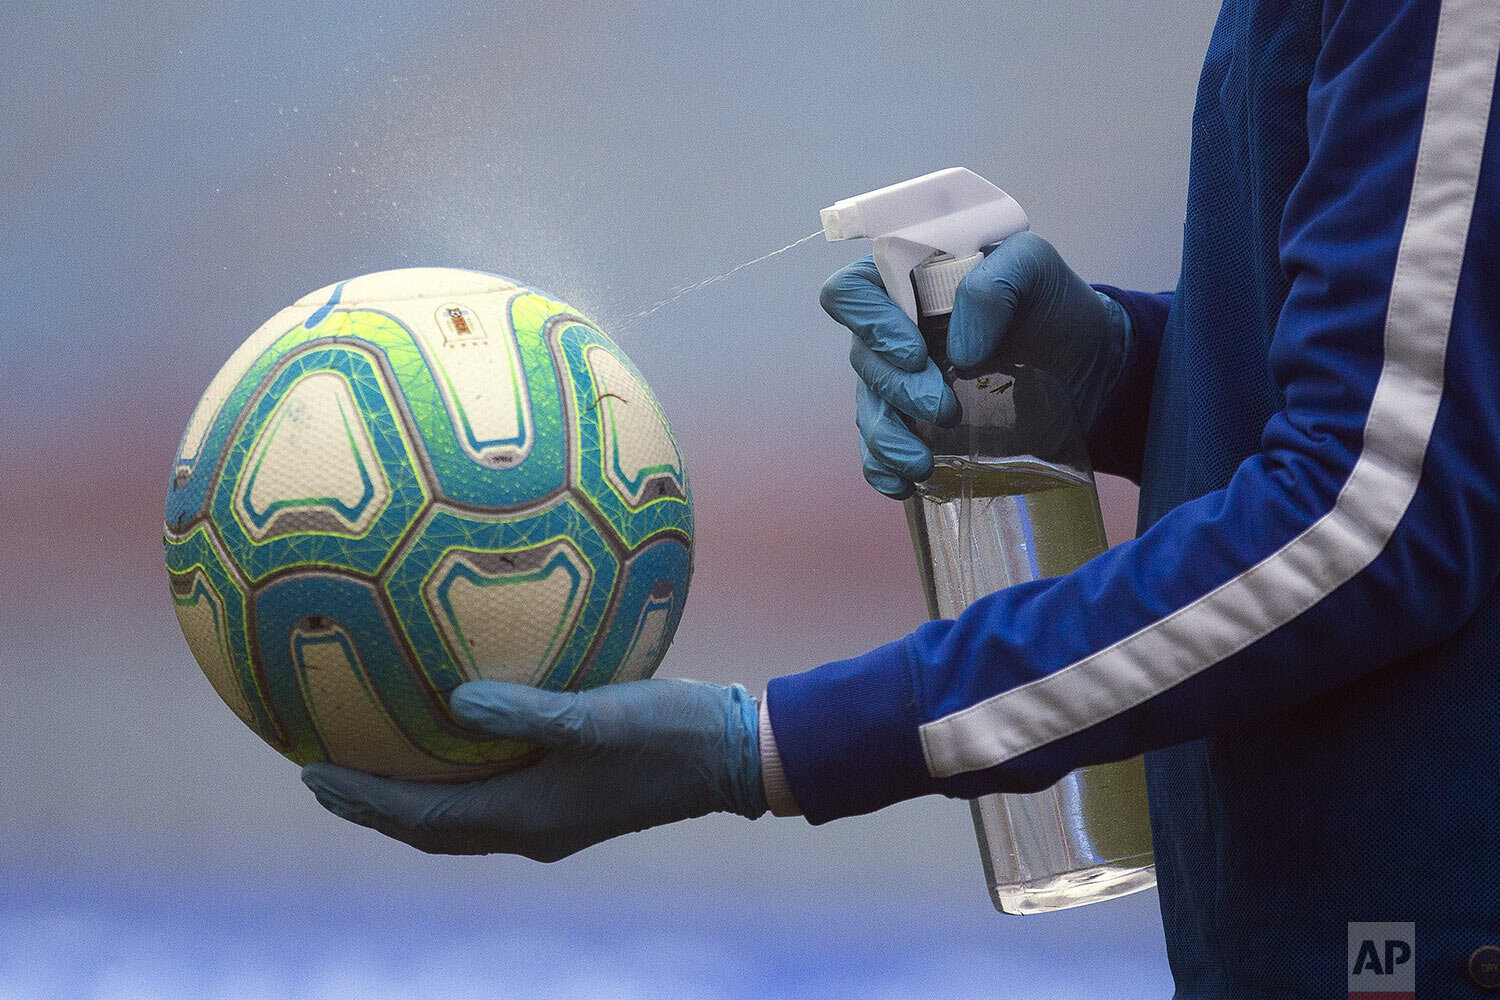  A ball catcher wearing gloves disinfects a soccer ball at a championship match between Nacional and Penarol in Montevideo, Uruguay, Aug. 9, 2020. The two greats of Uruguayan soccer tied 1-1 at the return of the local league, after a five month pause